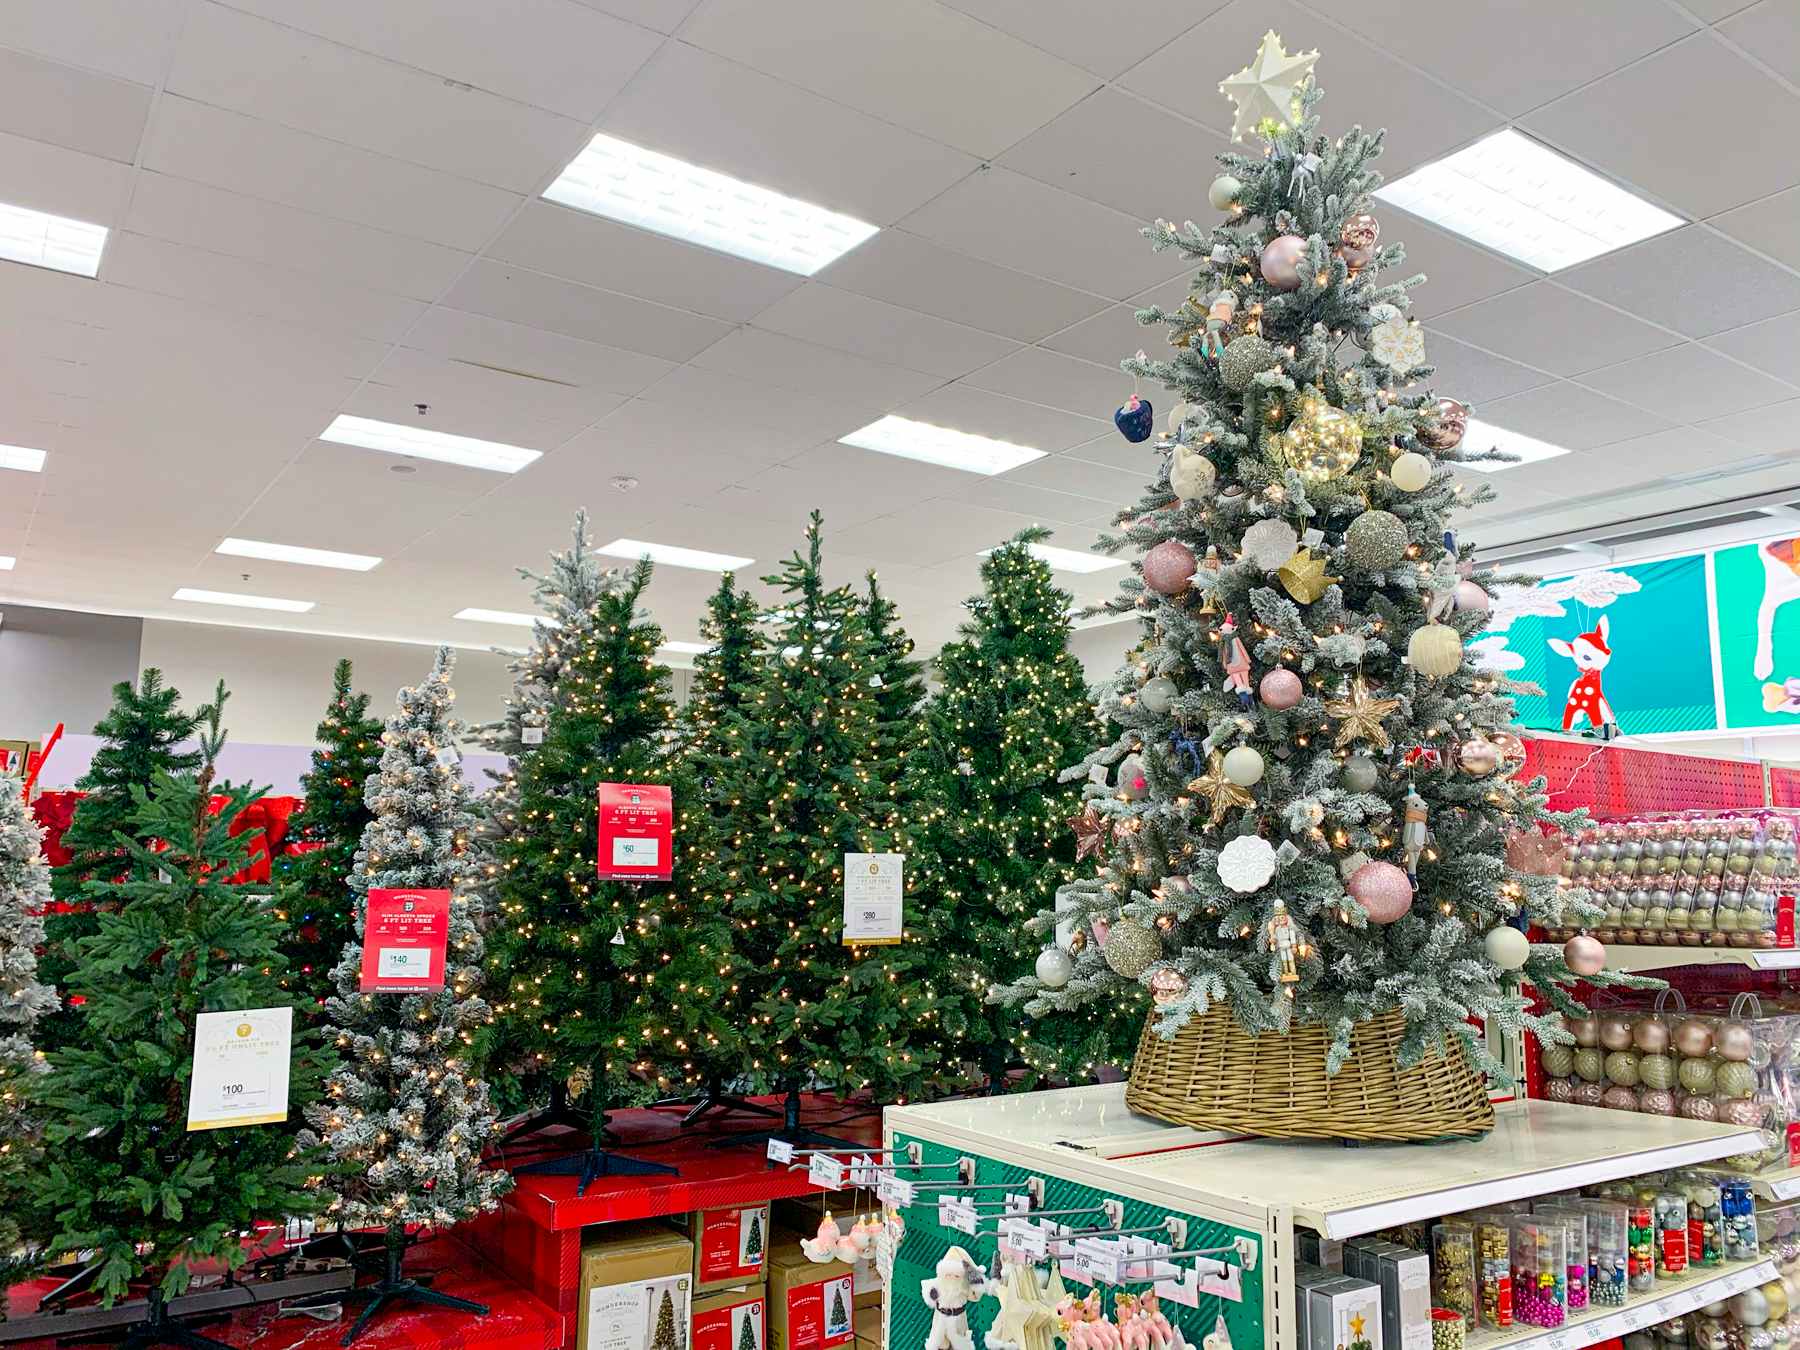 Artificial Christmas trees and decor at Target